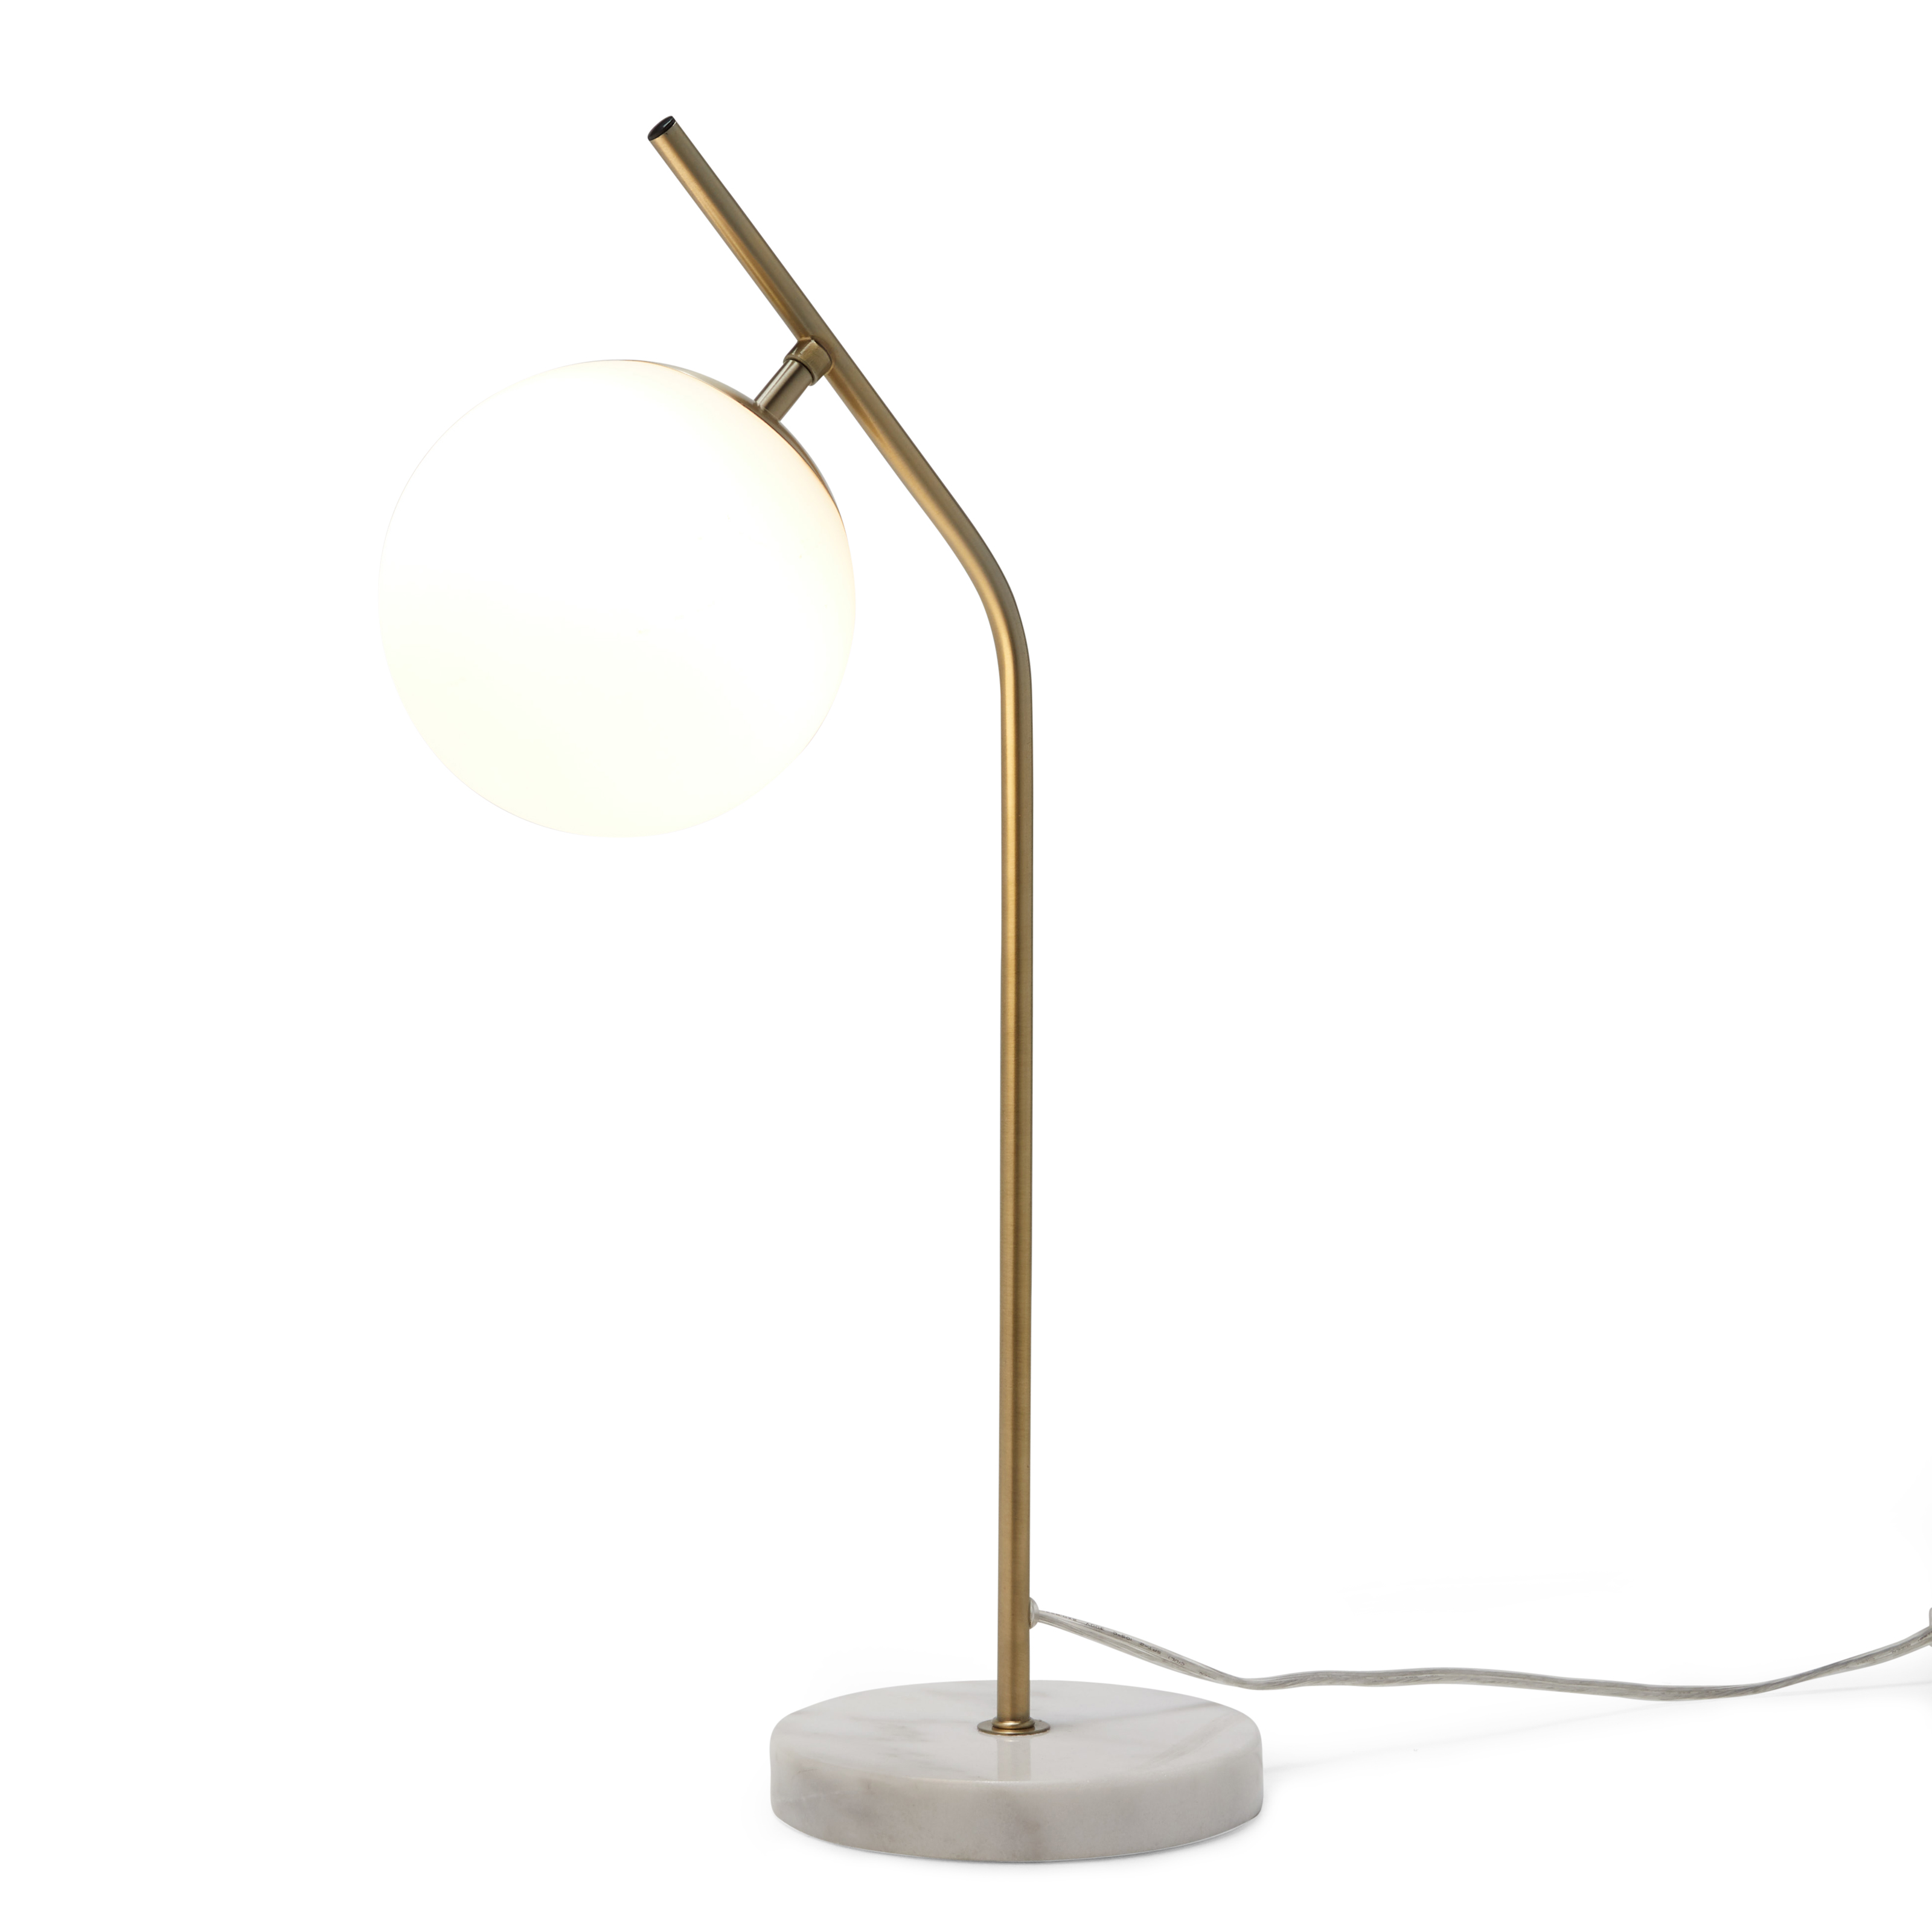 MoDRN Glam White and Antique Brass Marble Desk Lamp, LED Bulb Included - image 3 of 5